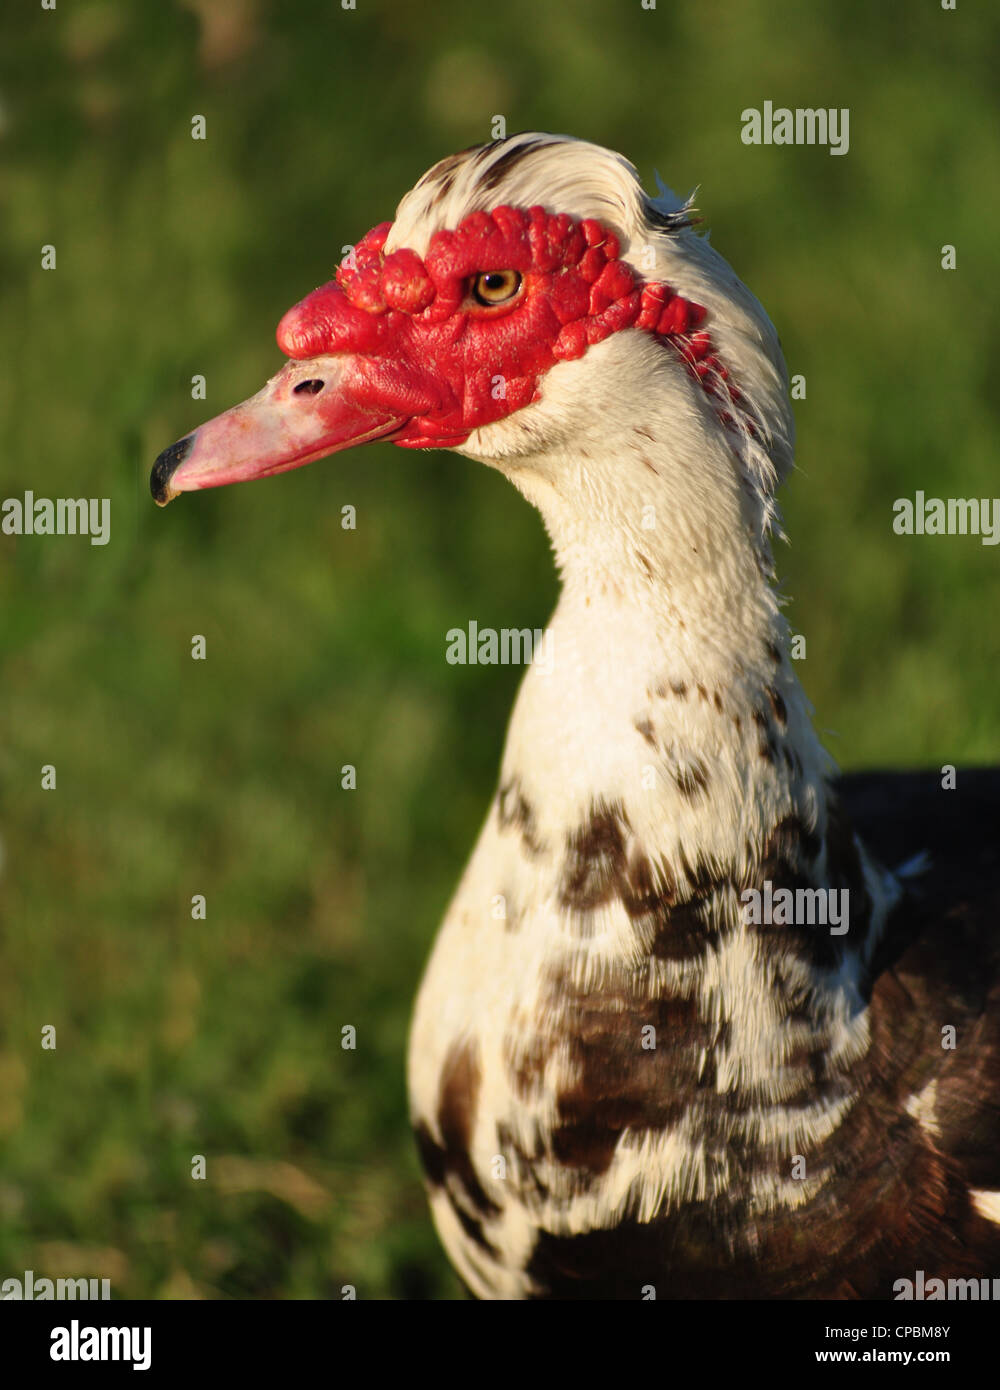 ugly red headed duck portrait Stock Photo